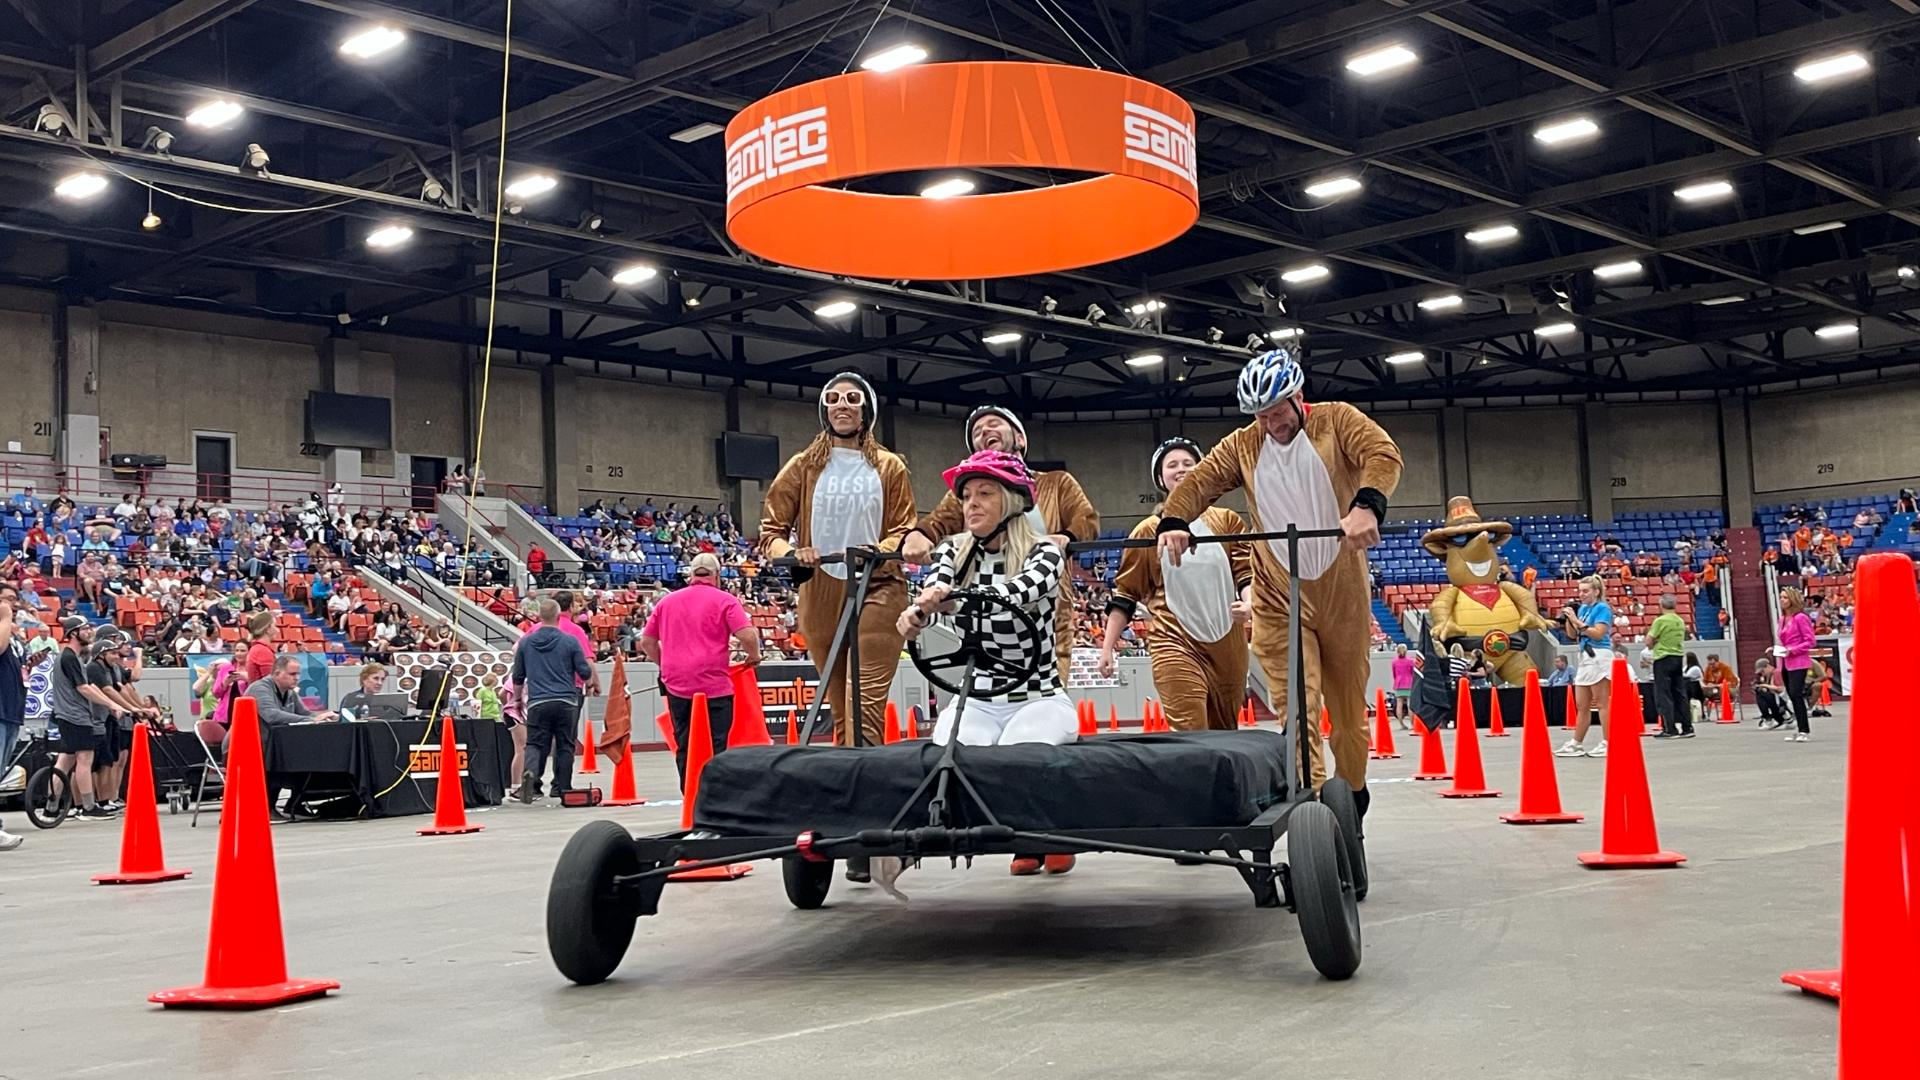 Teams gathered at Broadbent Arena to push their decorated beds around a figure eight course and competed for the fastest time during the 35th annual Great Bed Race.